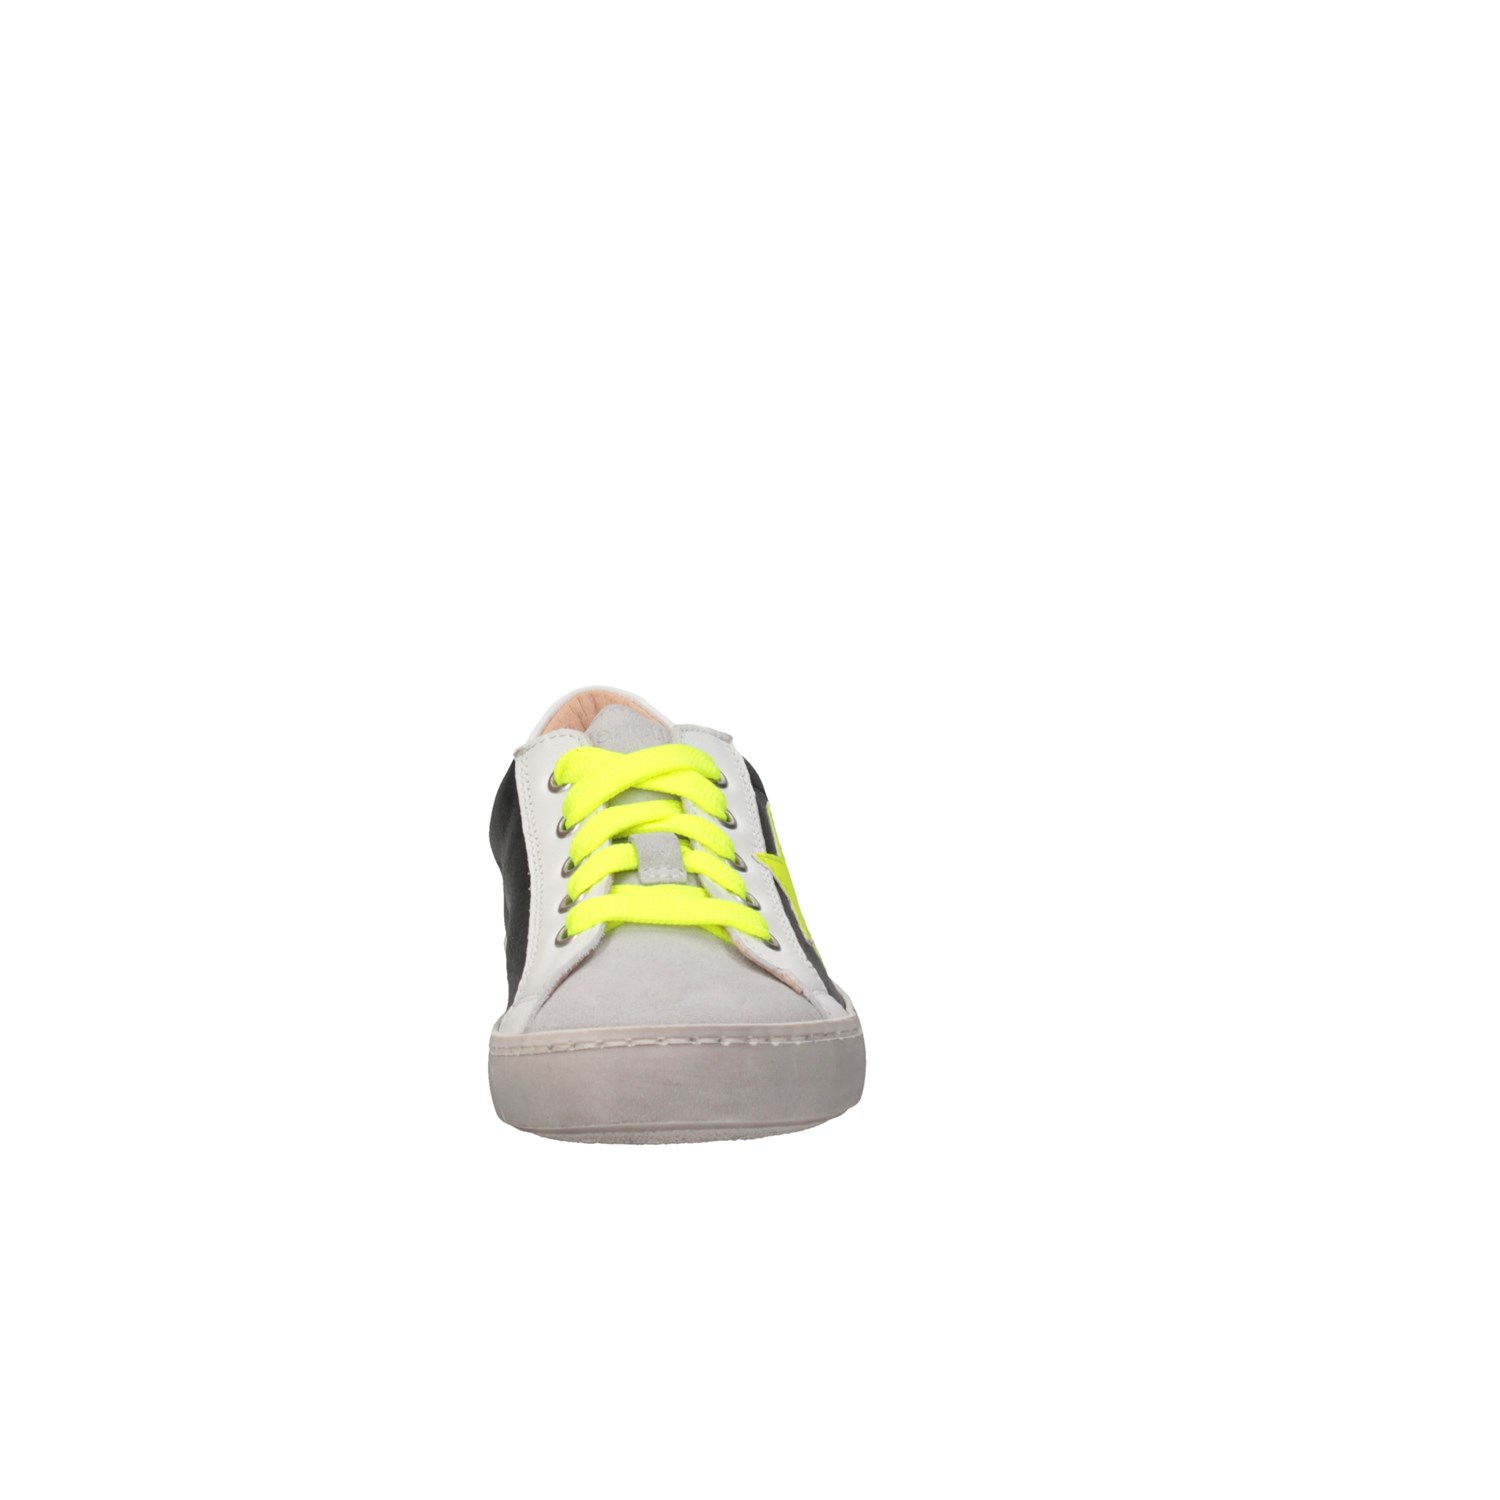 Dianetti Made In Italy I9869 ICE / FLUO YELLOW Shoes Child 